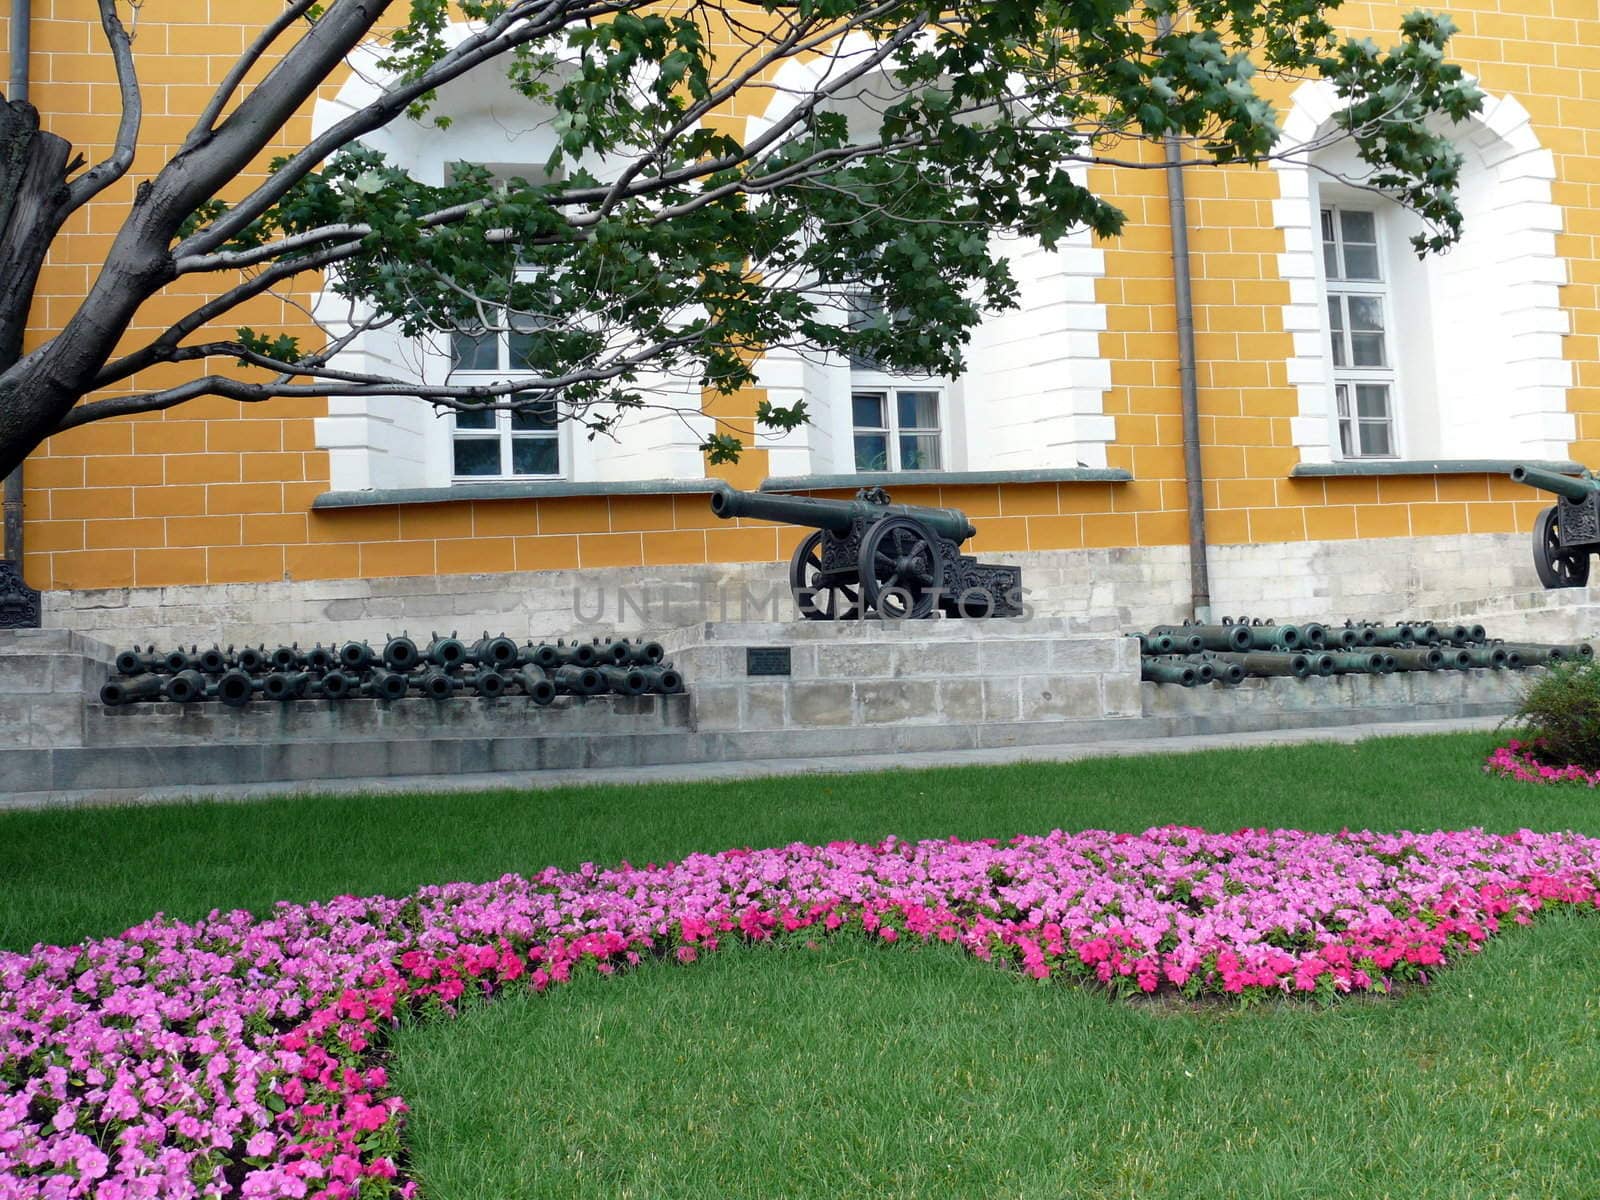 Cannon in the Kremlin territory